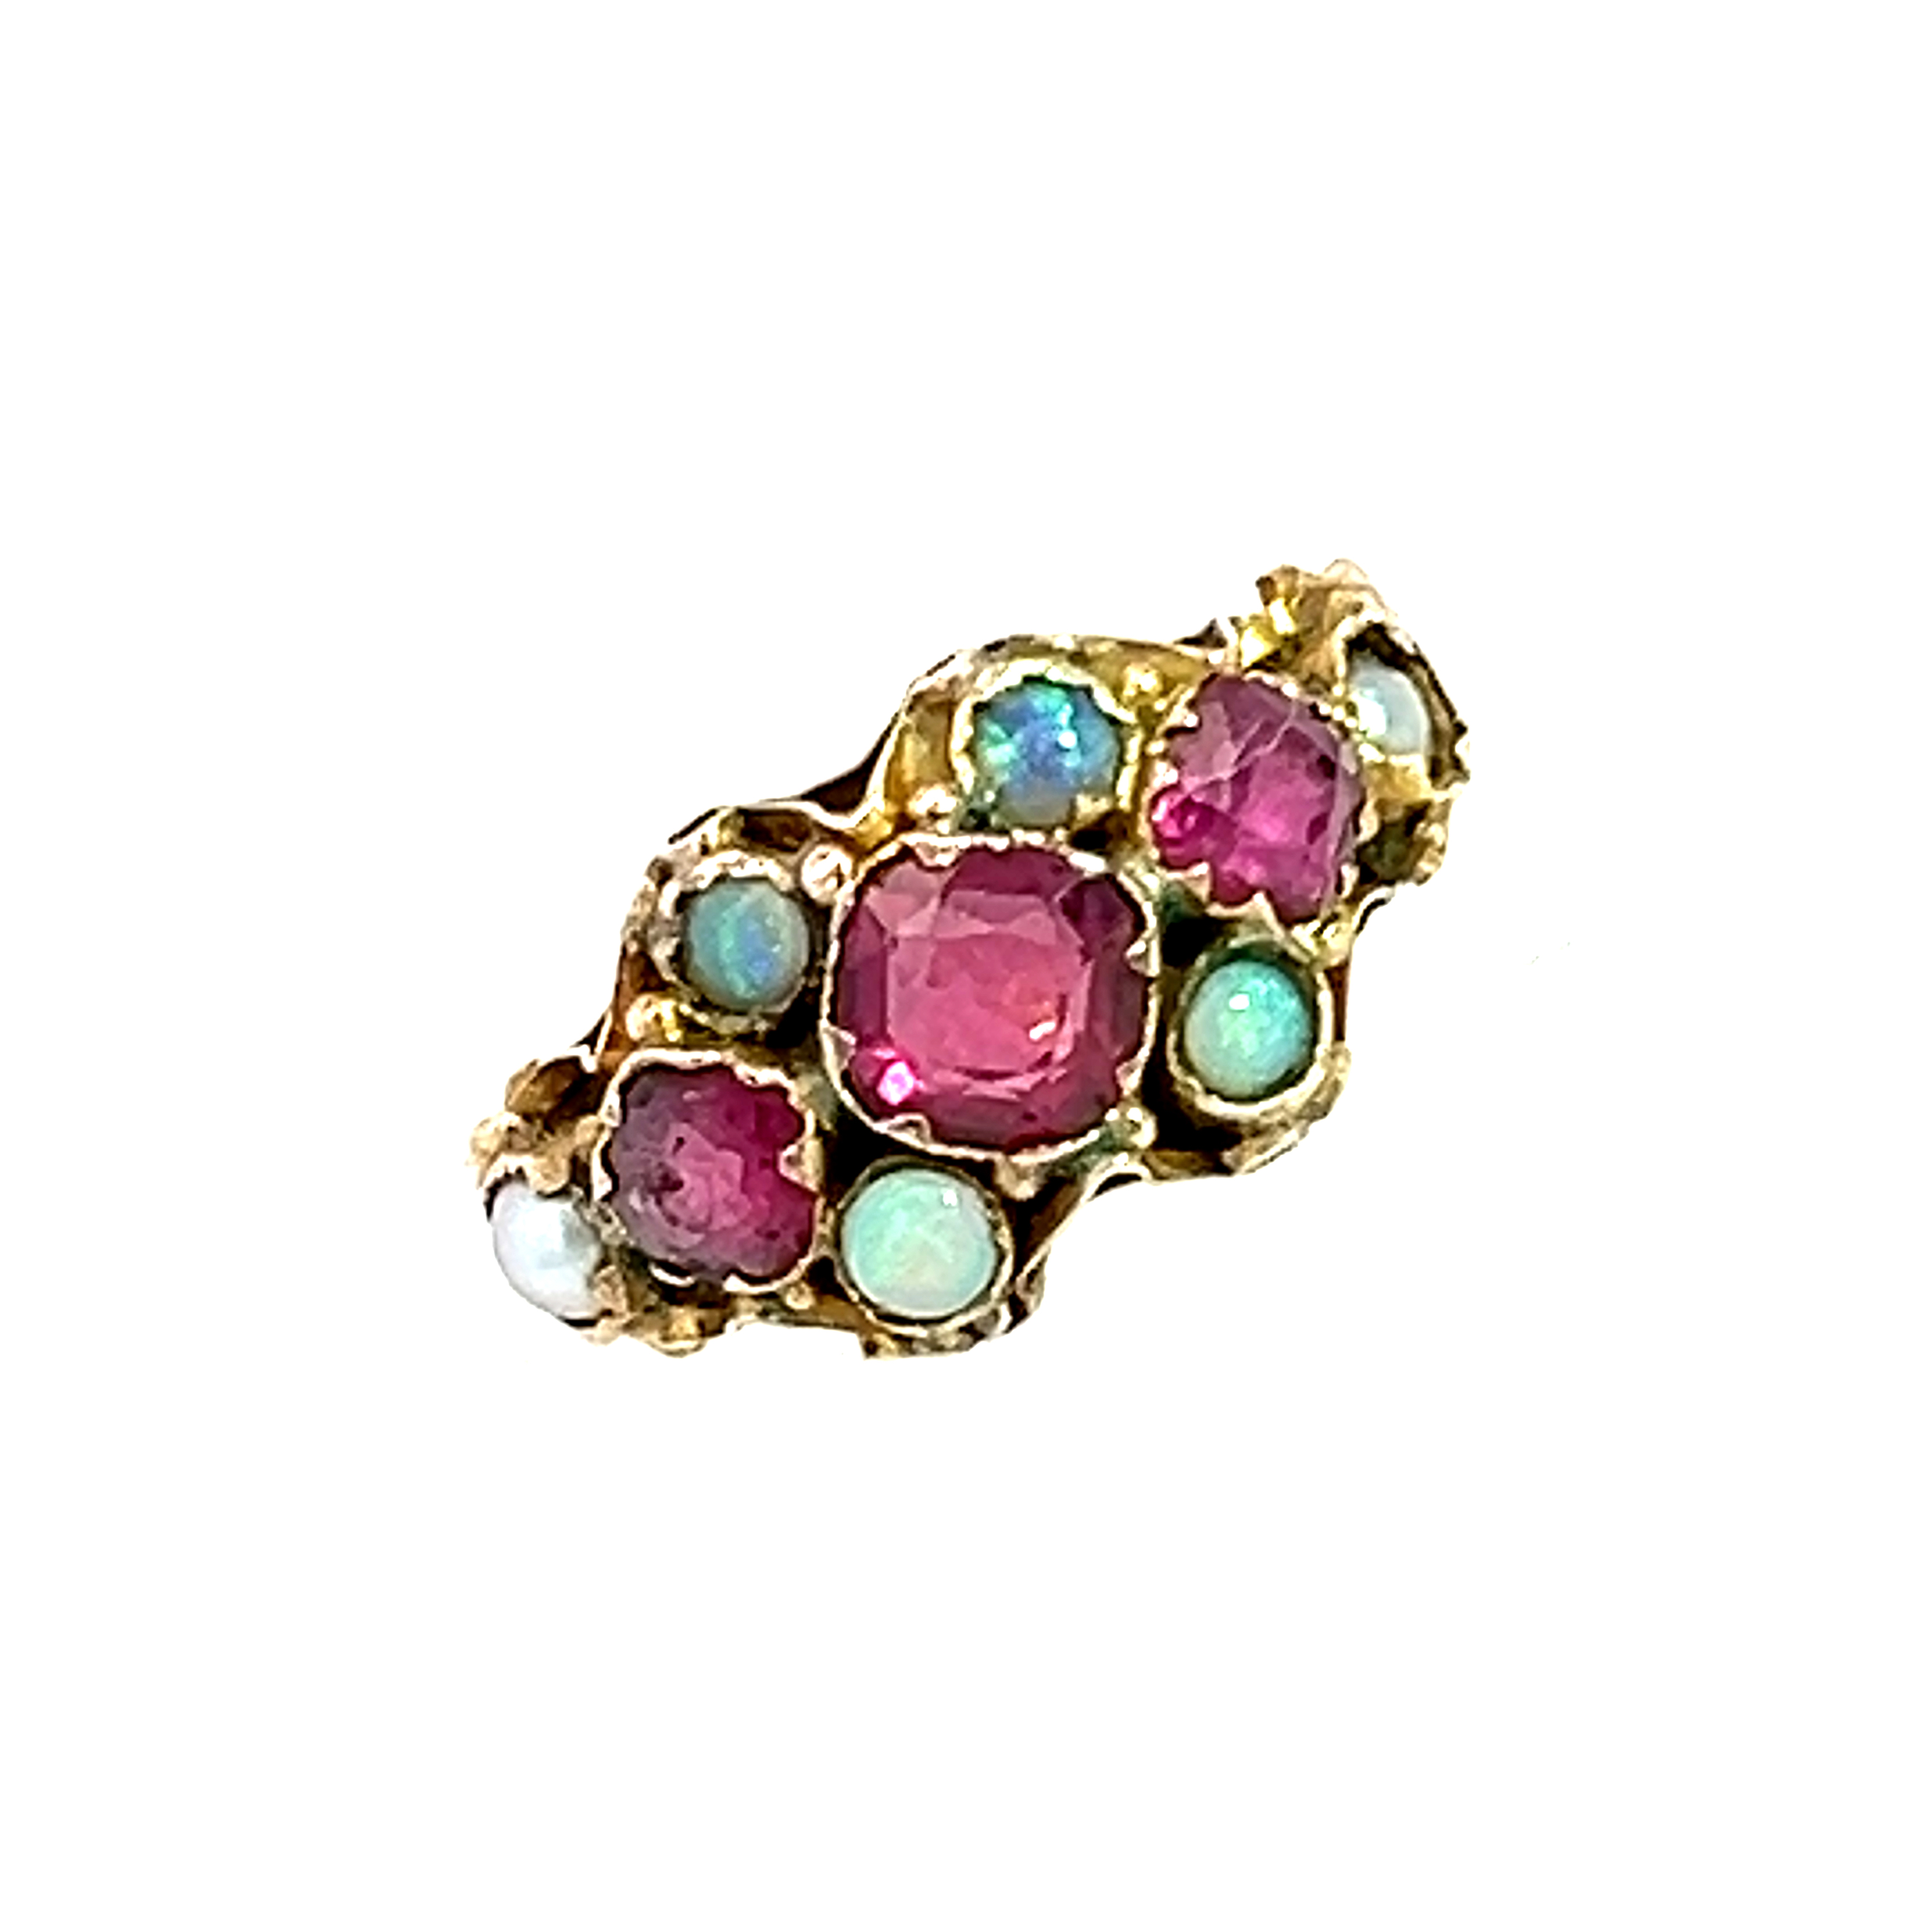 A Victorian Tourmaline, Pearl and Opal Ring